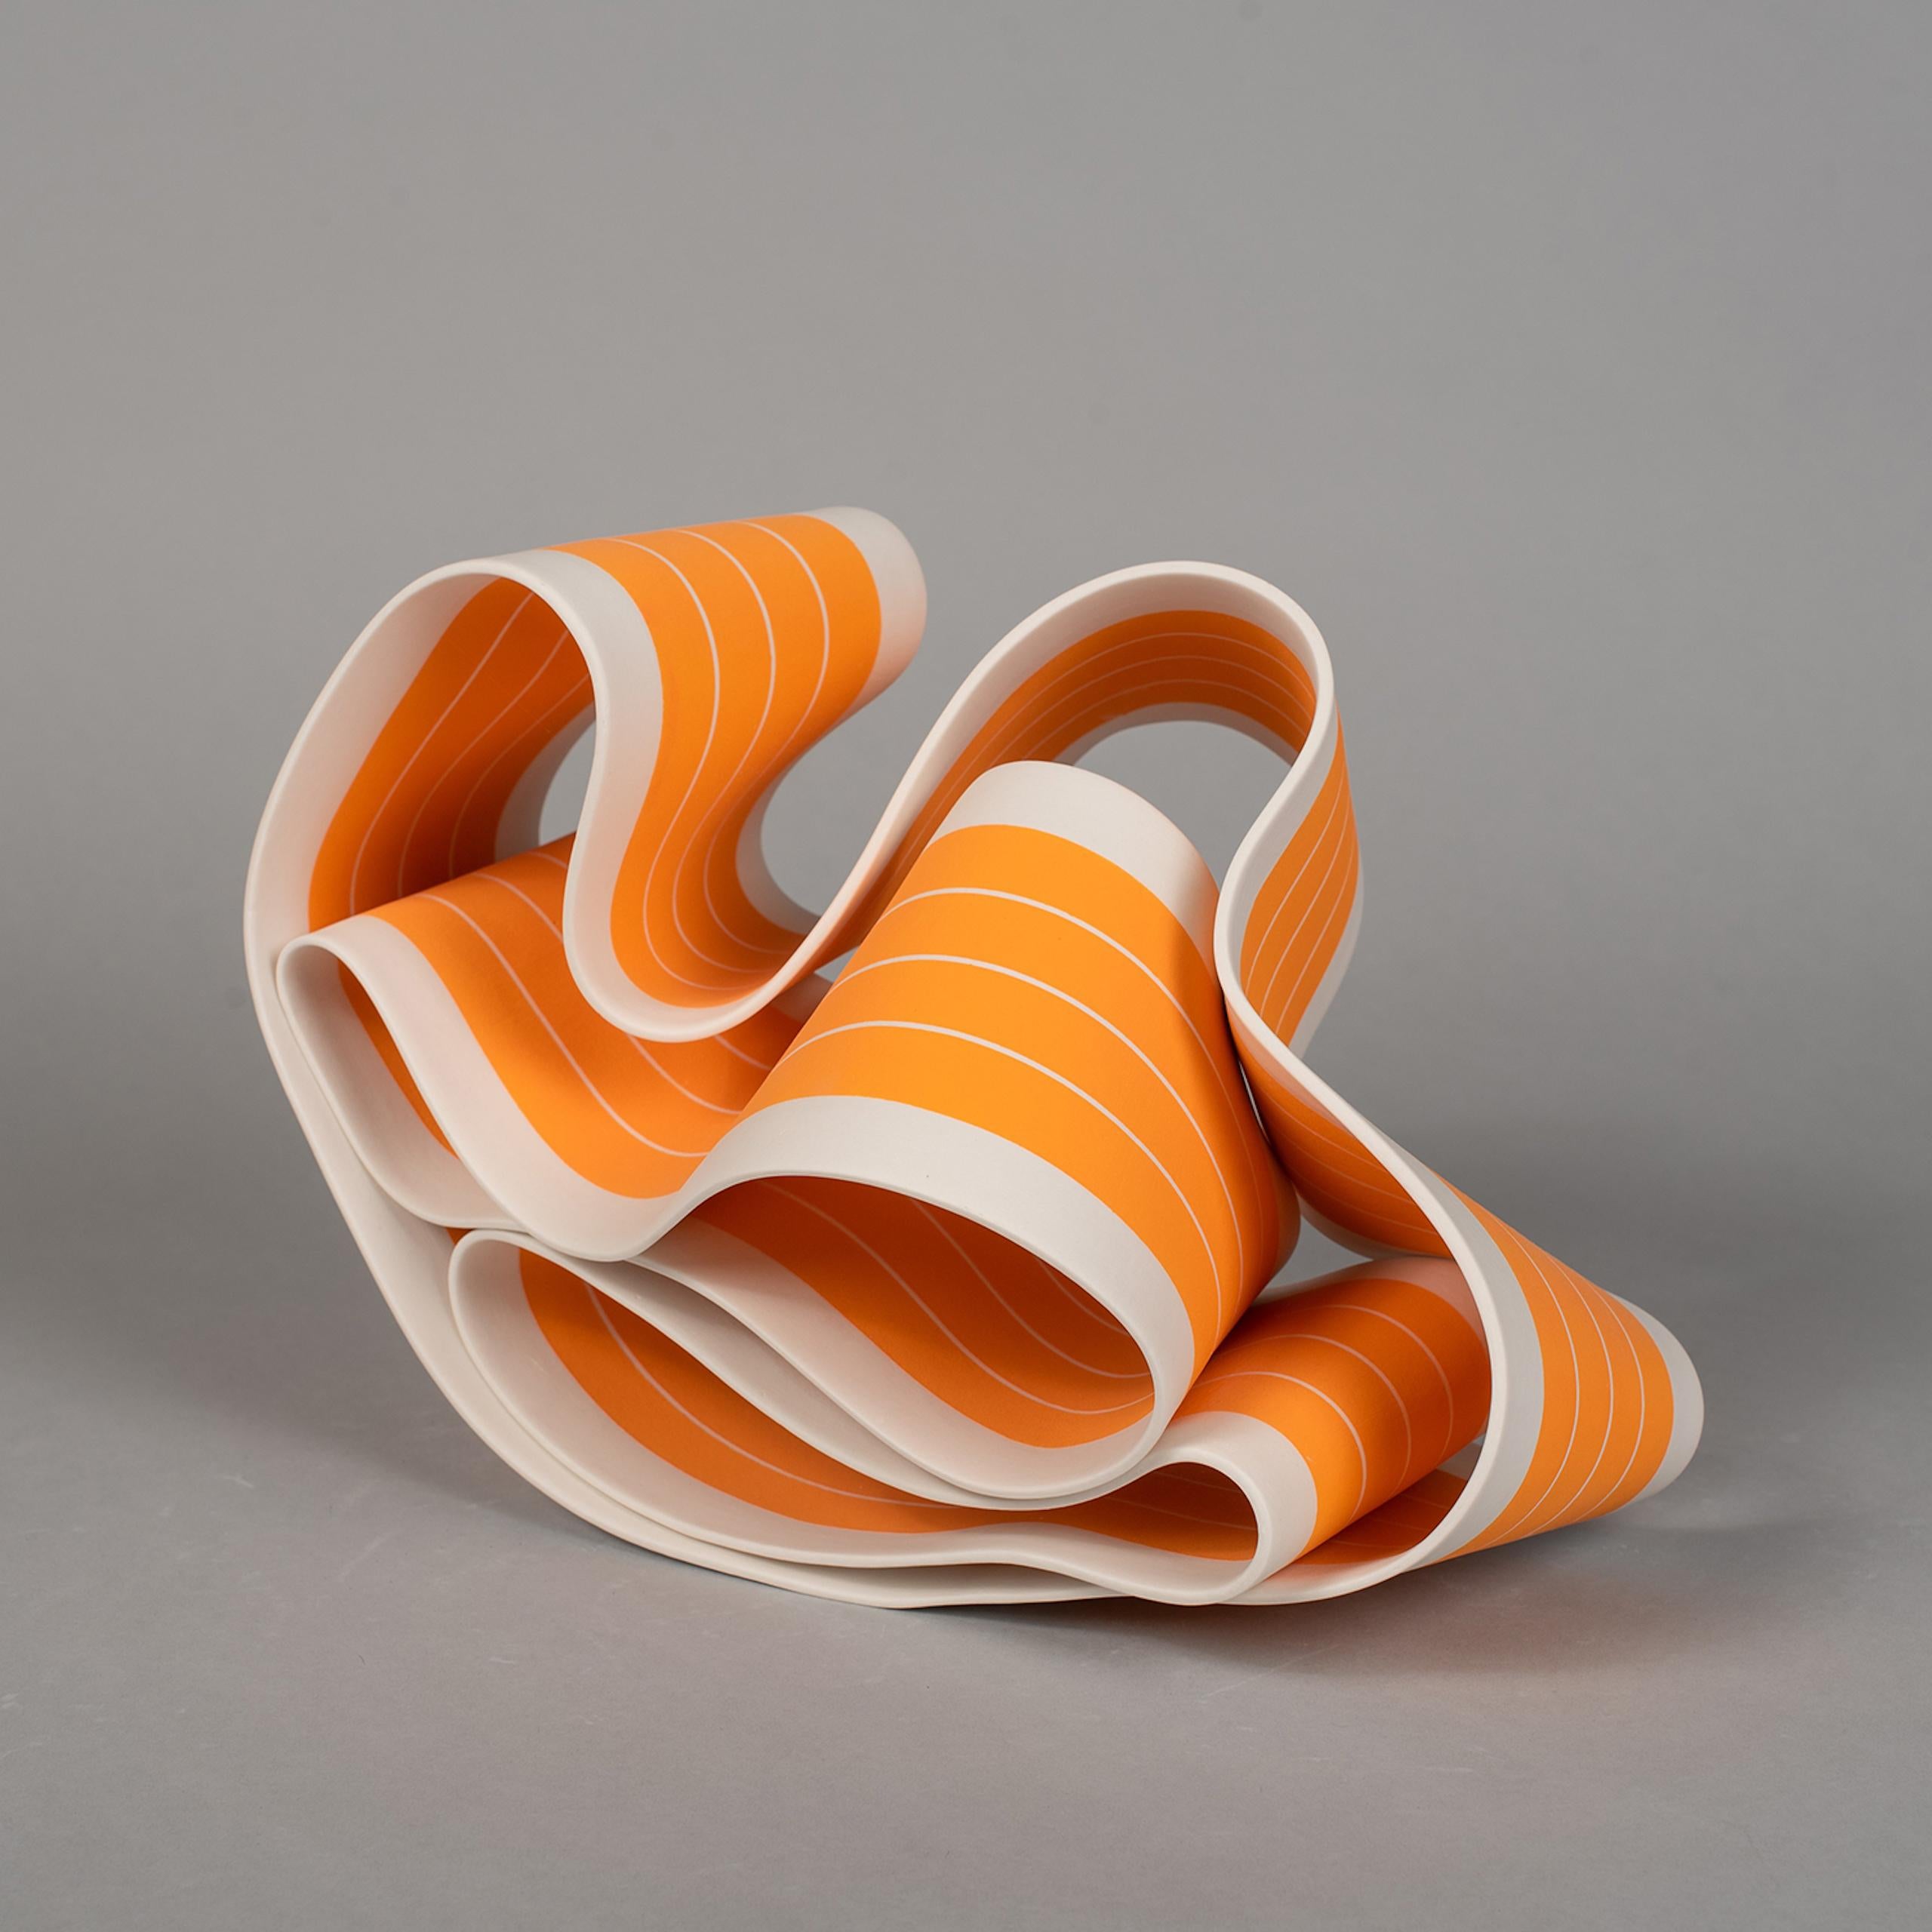 Folding in Motion 5 is a unique paper porcelain sculpture by contemporary artist Simcha Even-Chen, dimensions are 22 cm × 30 cm × 19 cm (8.7 × 11.8 × 7.5 in). The sculpture is signed and comes with a certificate of authenticity.

This sculpture is a